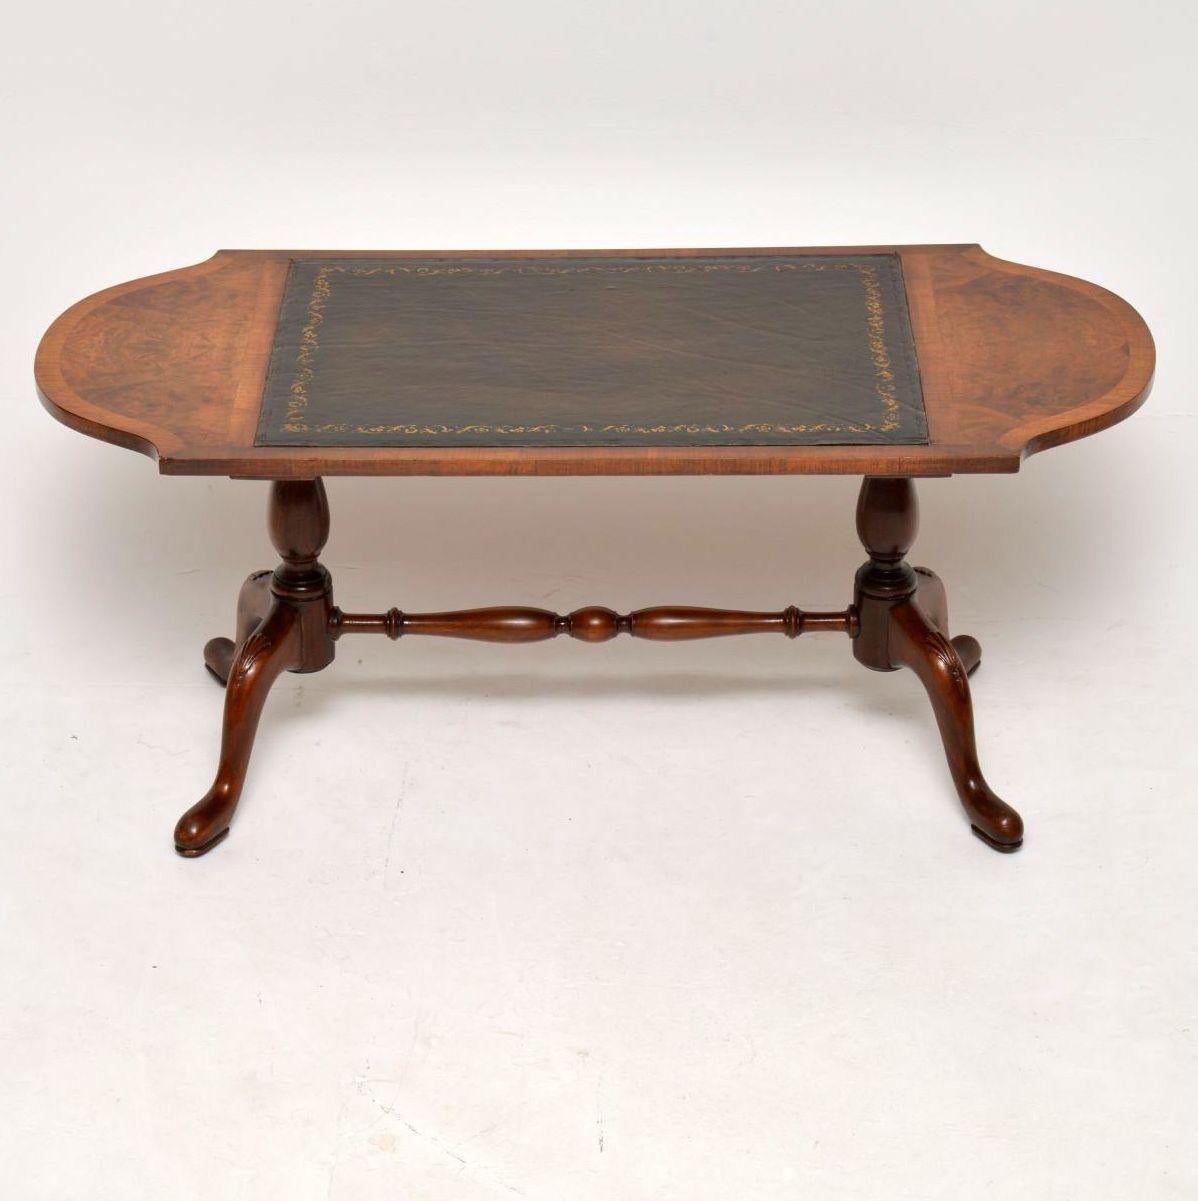 Antique walnut coffee table with a tooled leather in the middle and burr walnut panels inset in the shaped ends. It sits on twin pedestal legs, joined by a turned cross stretcher with two shaped legs carved on the knees with shell carvings. This